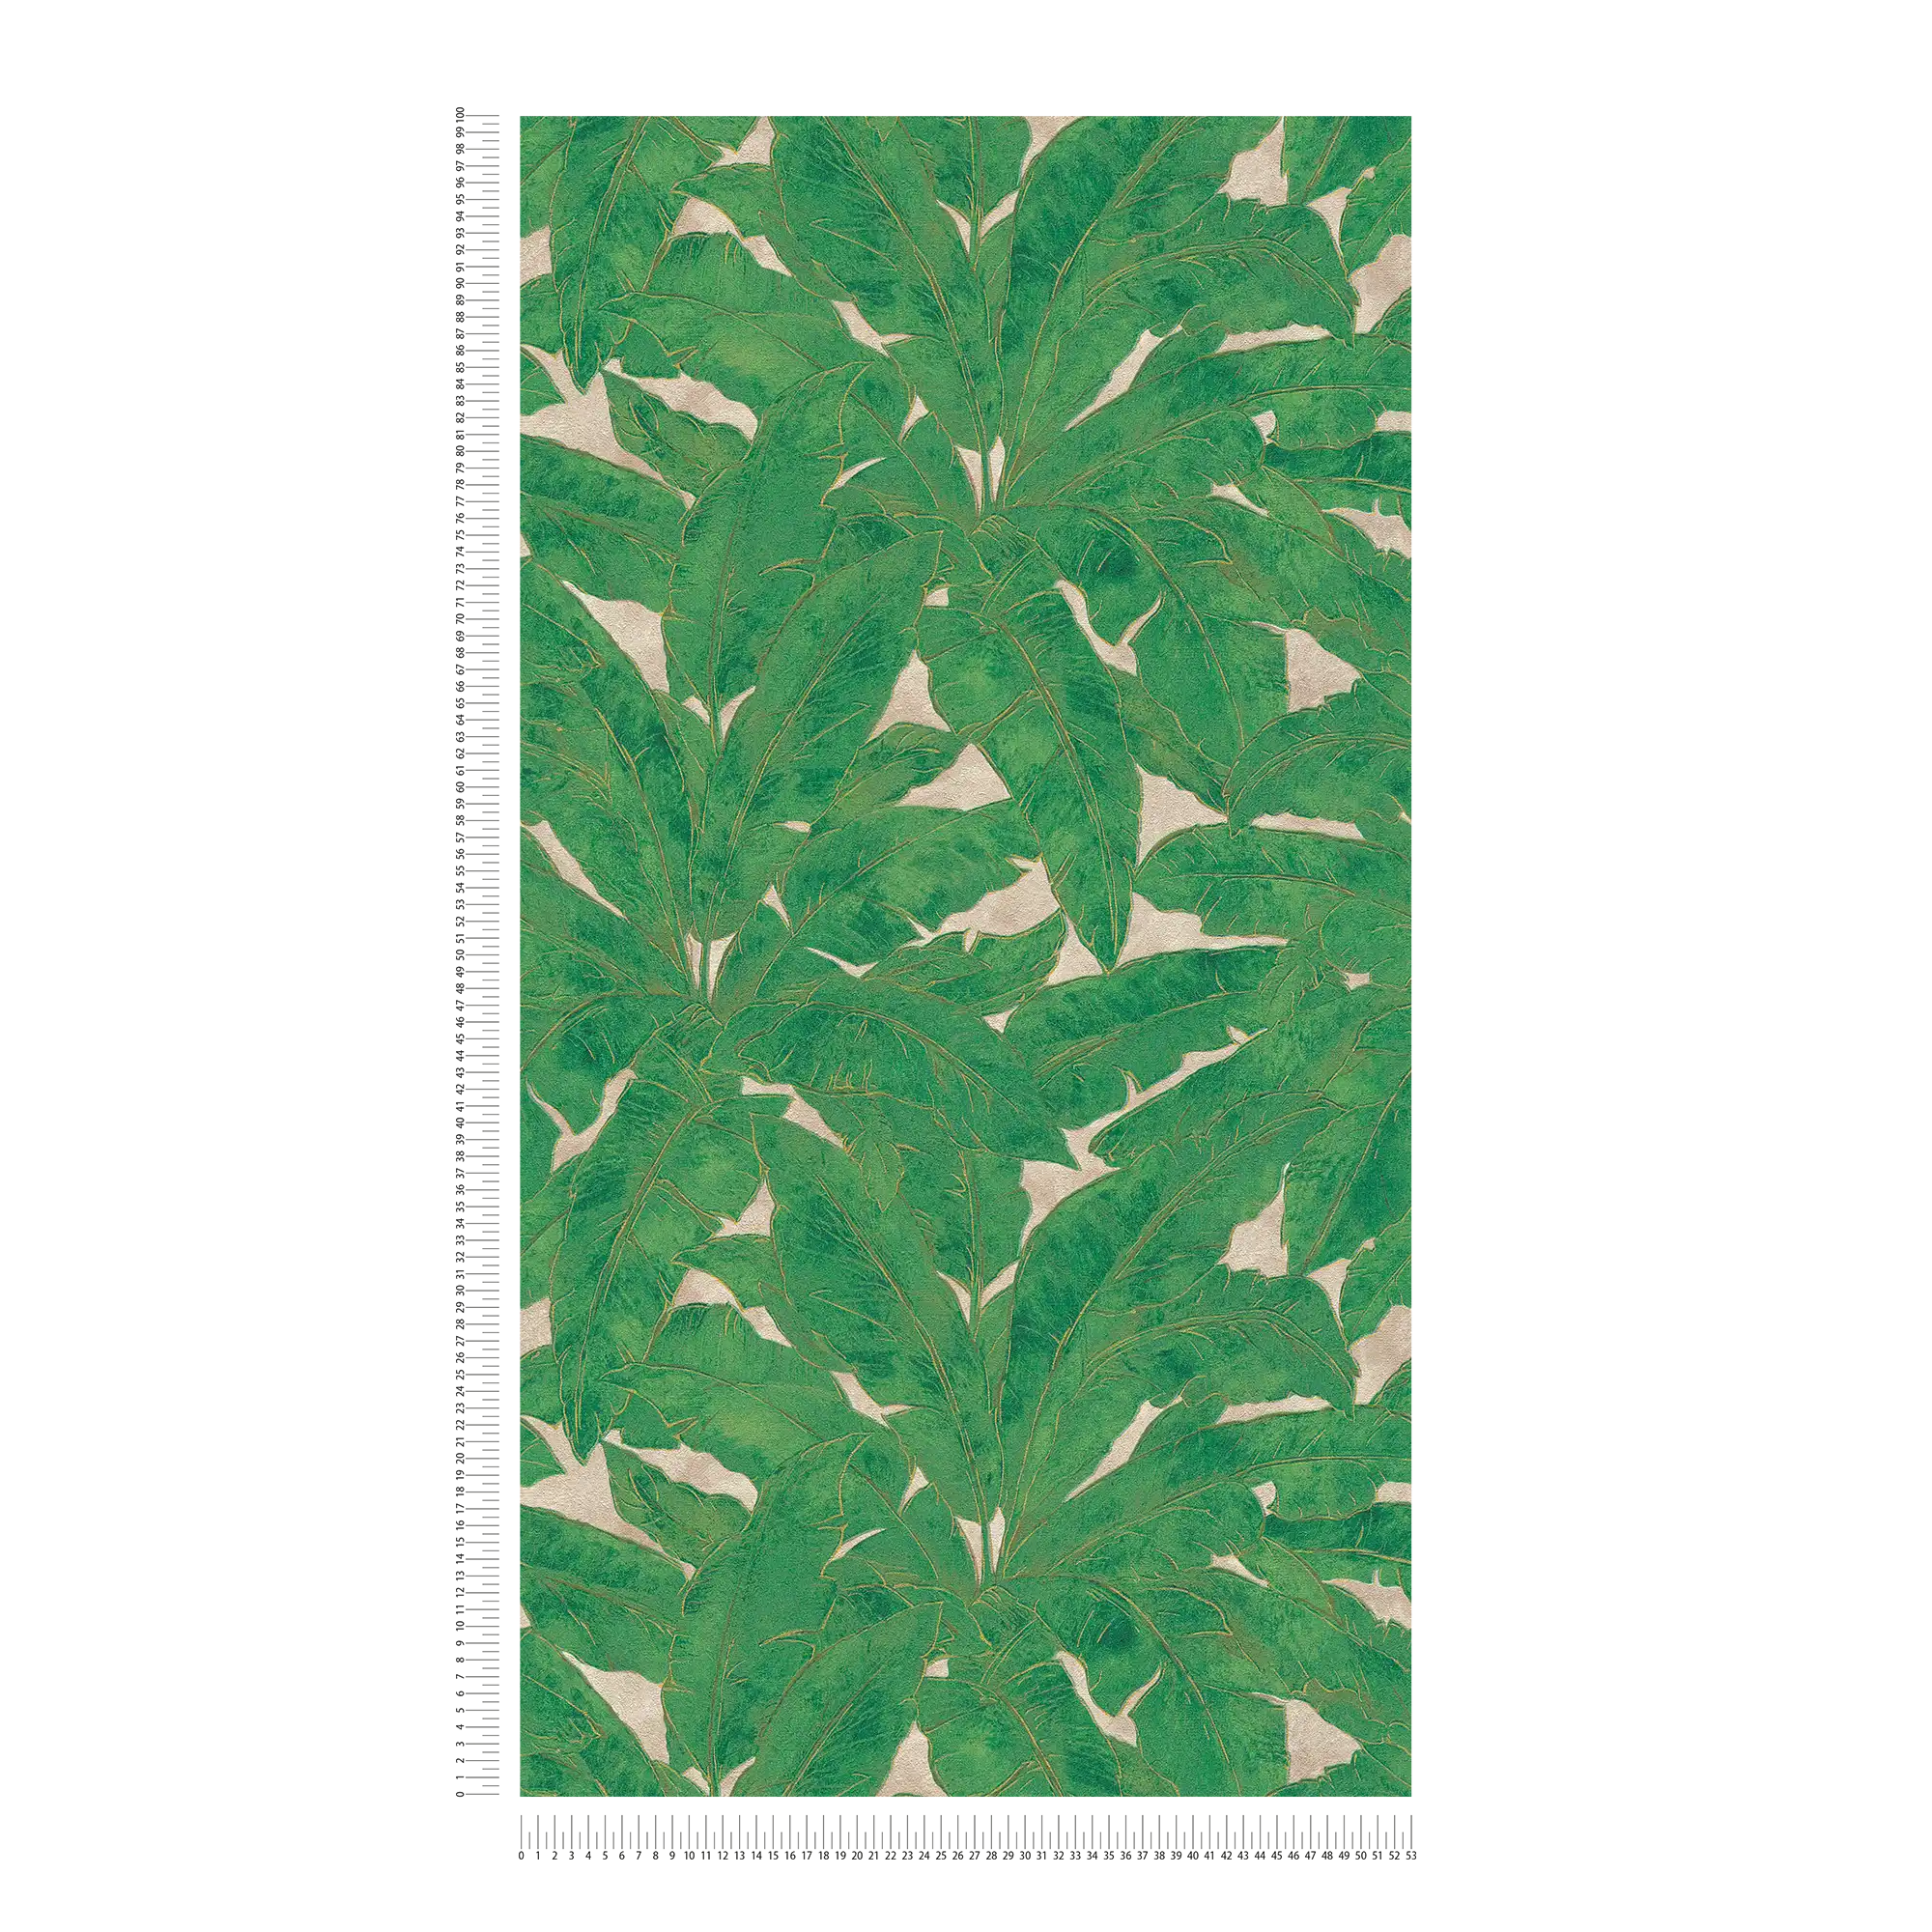             Jungle wallpaper with gold contour - green, gold, beige
        